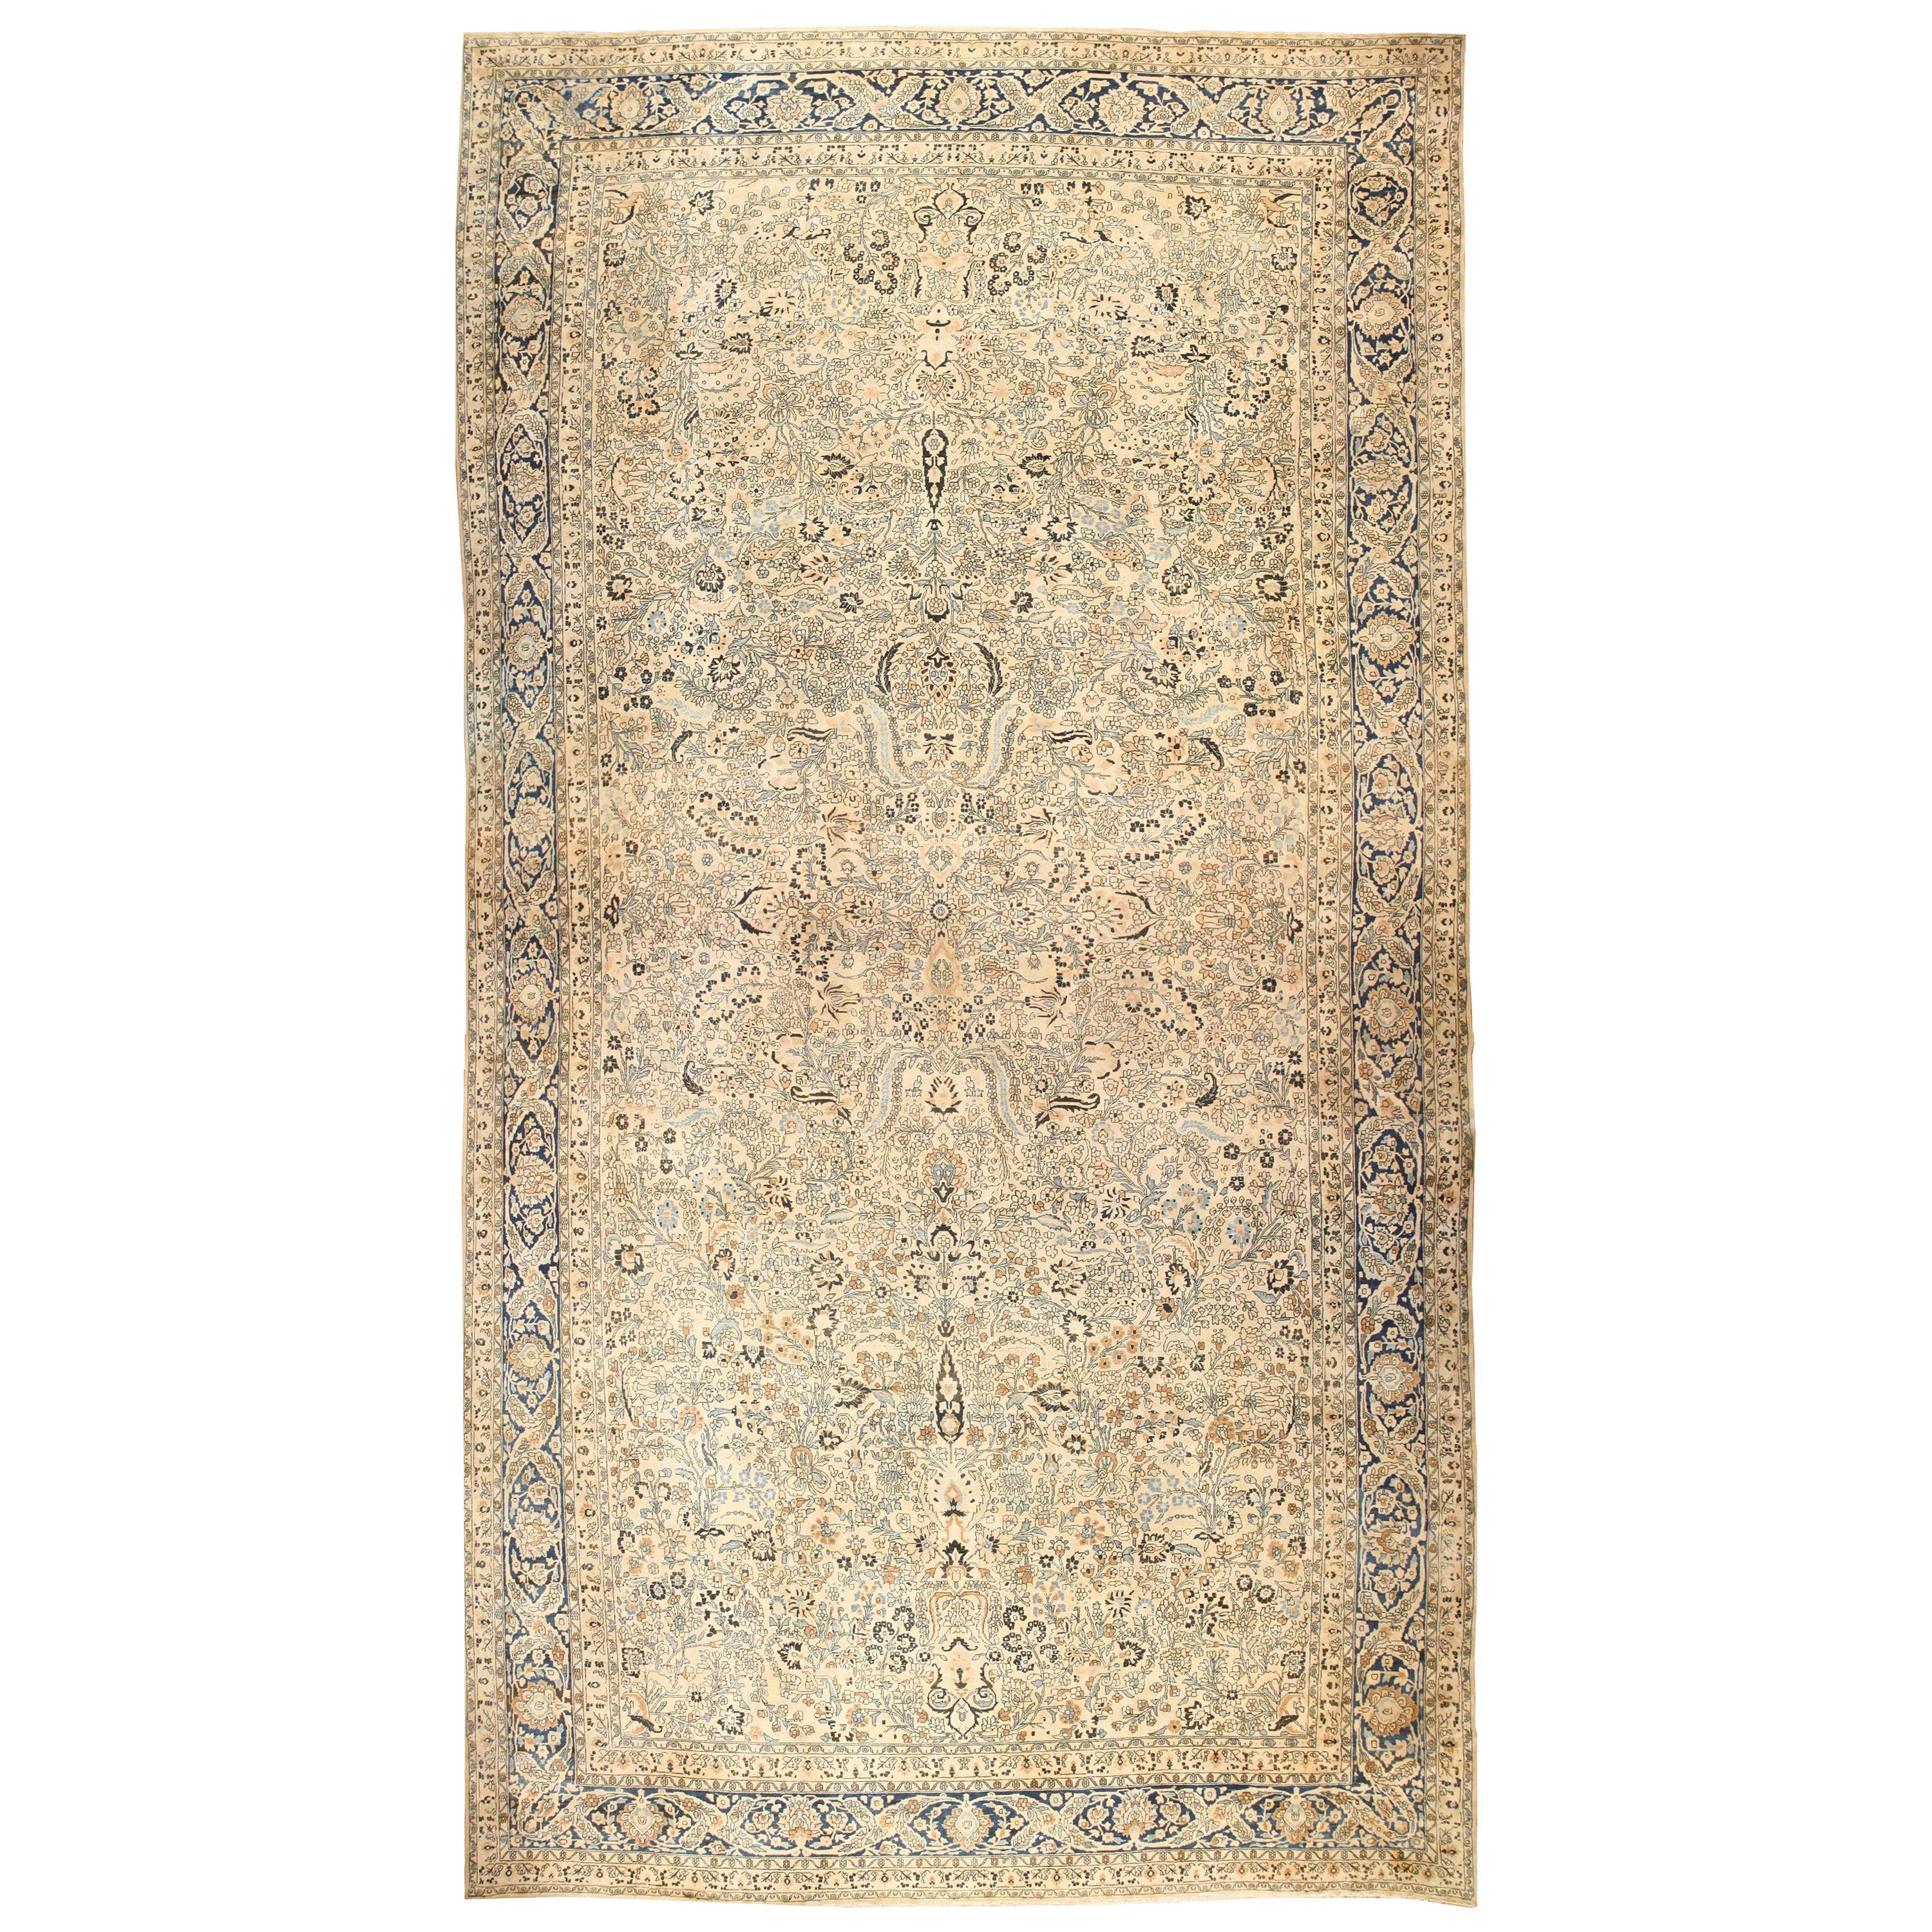 Nazmiyal Collection Antique Persian Khorassan Rug. Size: 14 ft 4 in x 28 ft